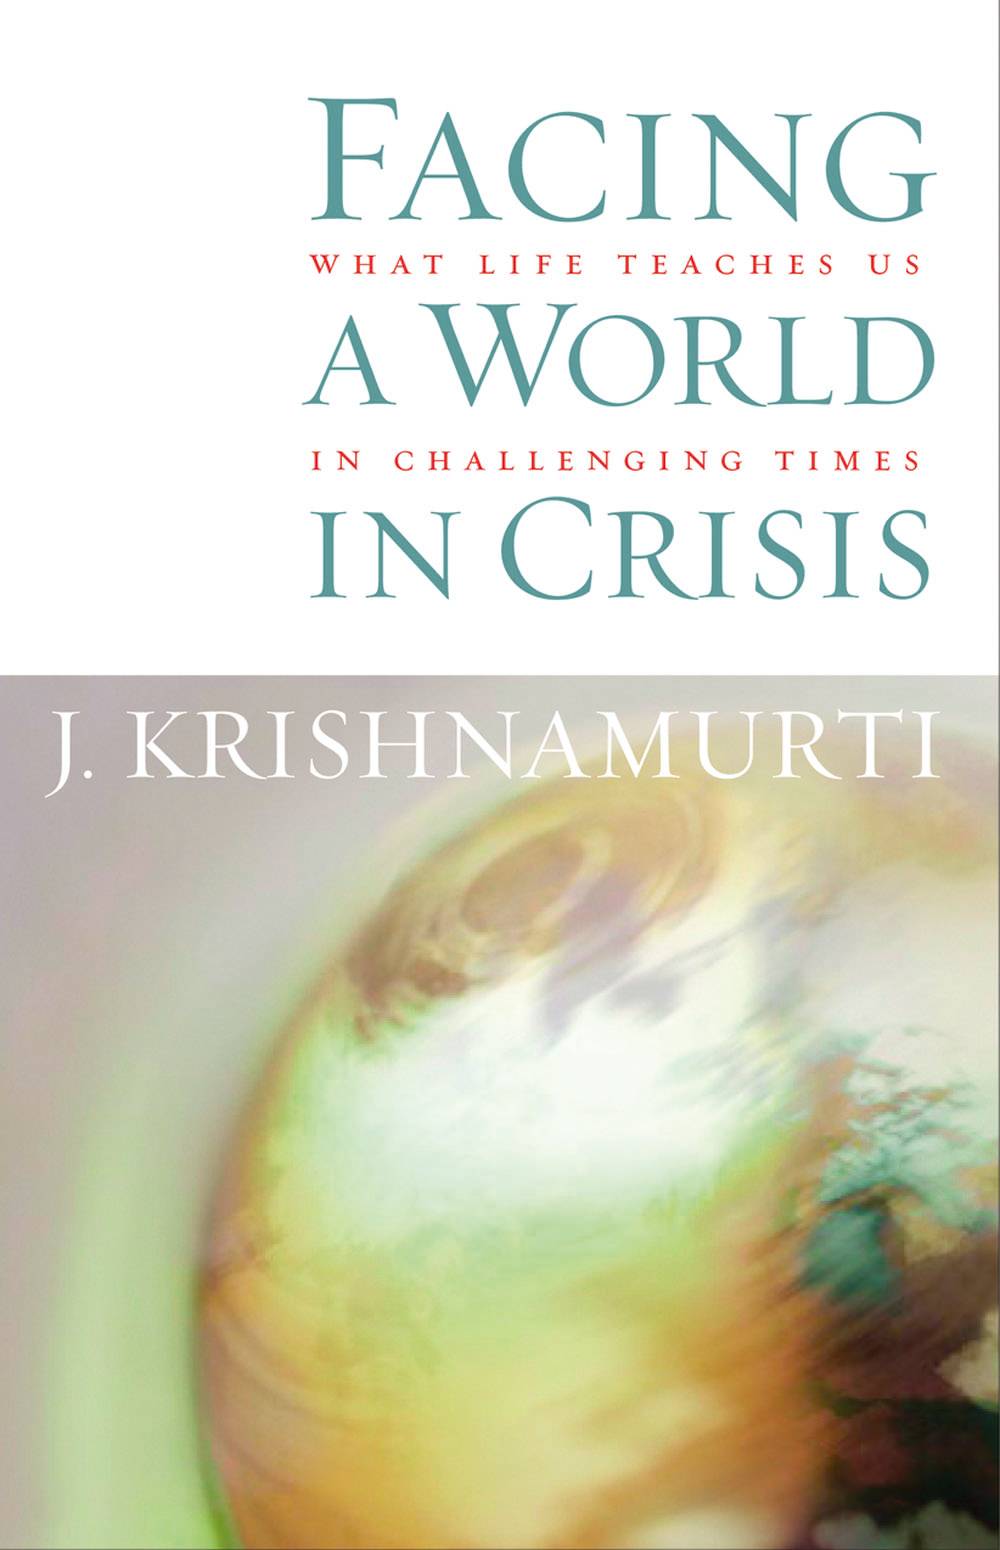 Facing a world in crisis - what life teaches us in challenging times